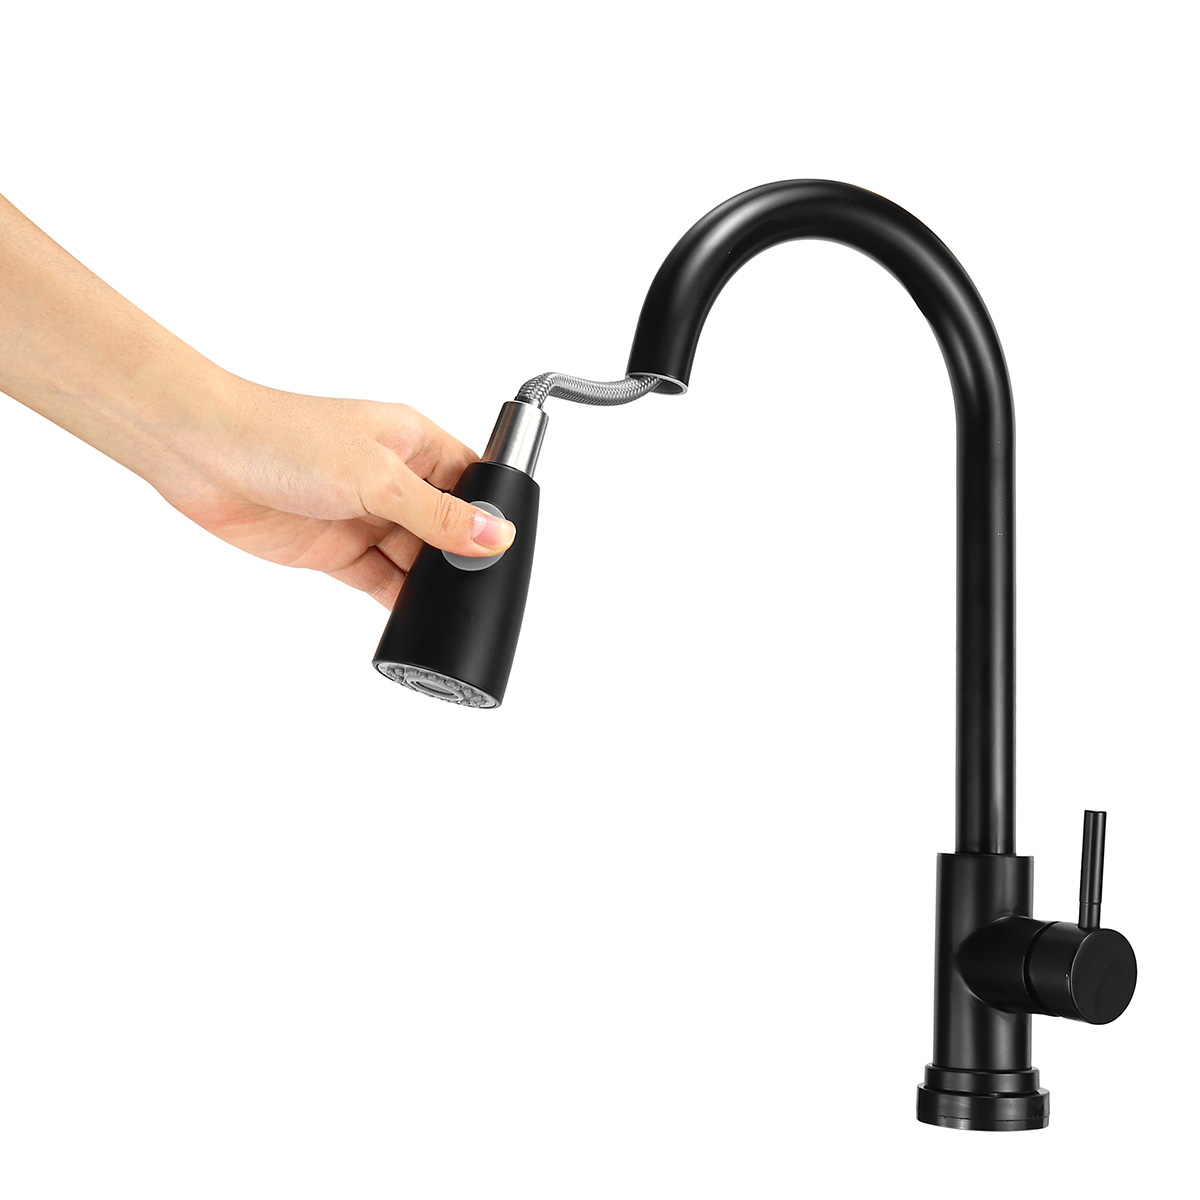 Stoneway Kitchen Sink Faucet with Pull Down Sprayer Black, High Arc Single Handle with Hose, Commercial Modern rv Solid Brass, Matte Black - image 1 of 7